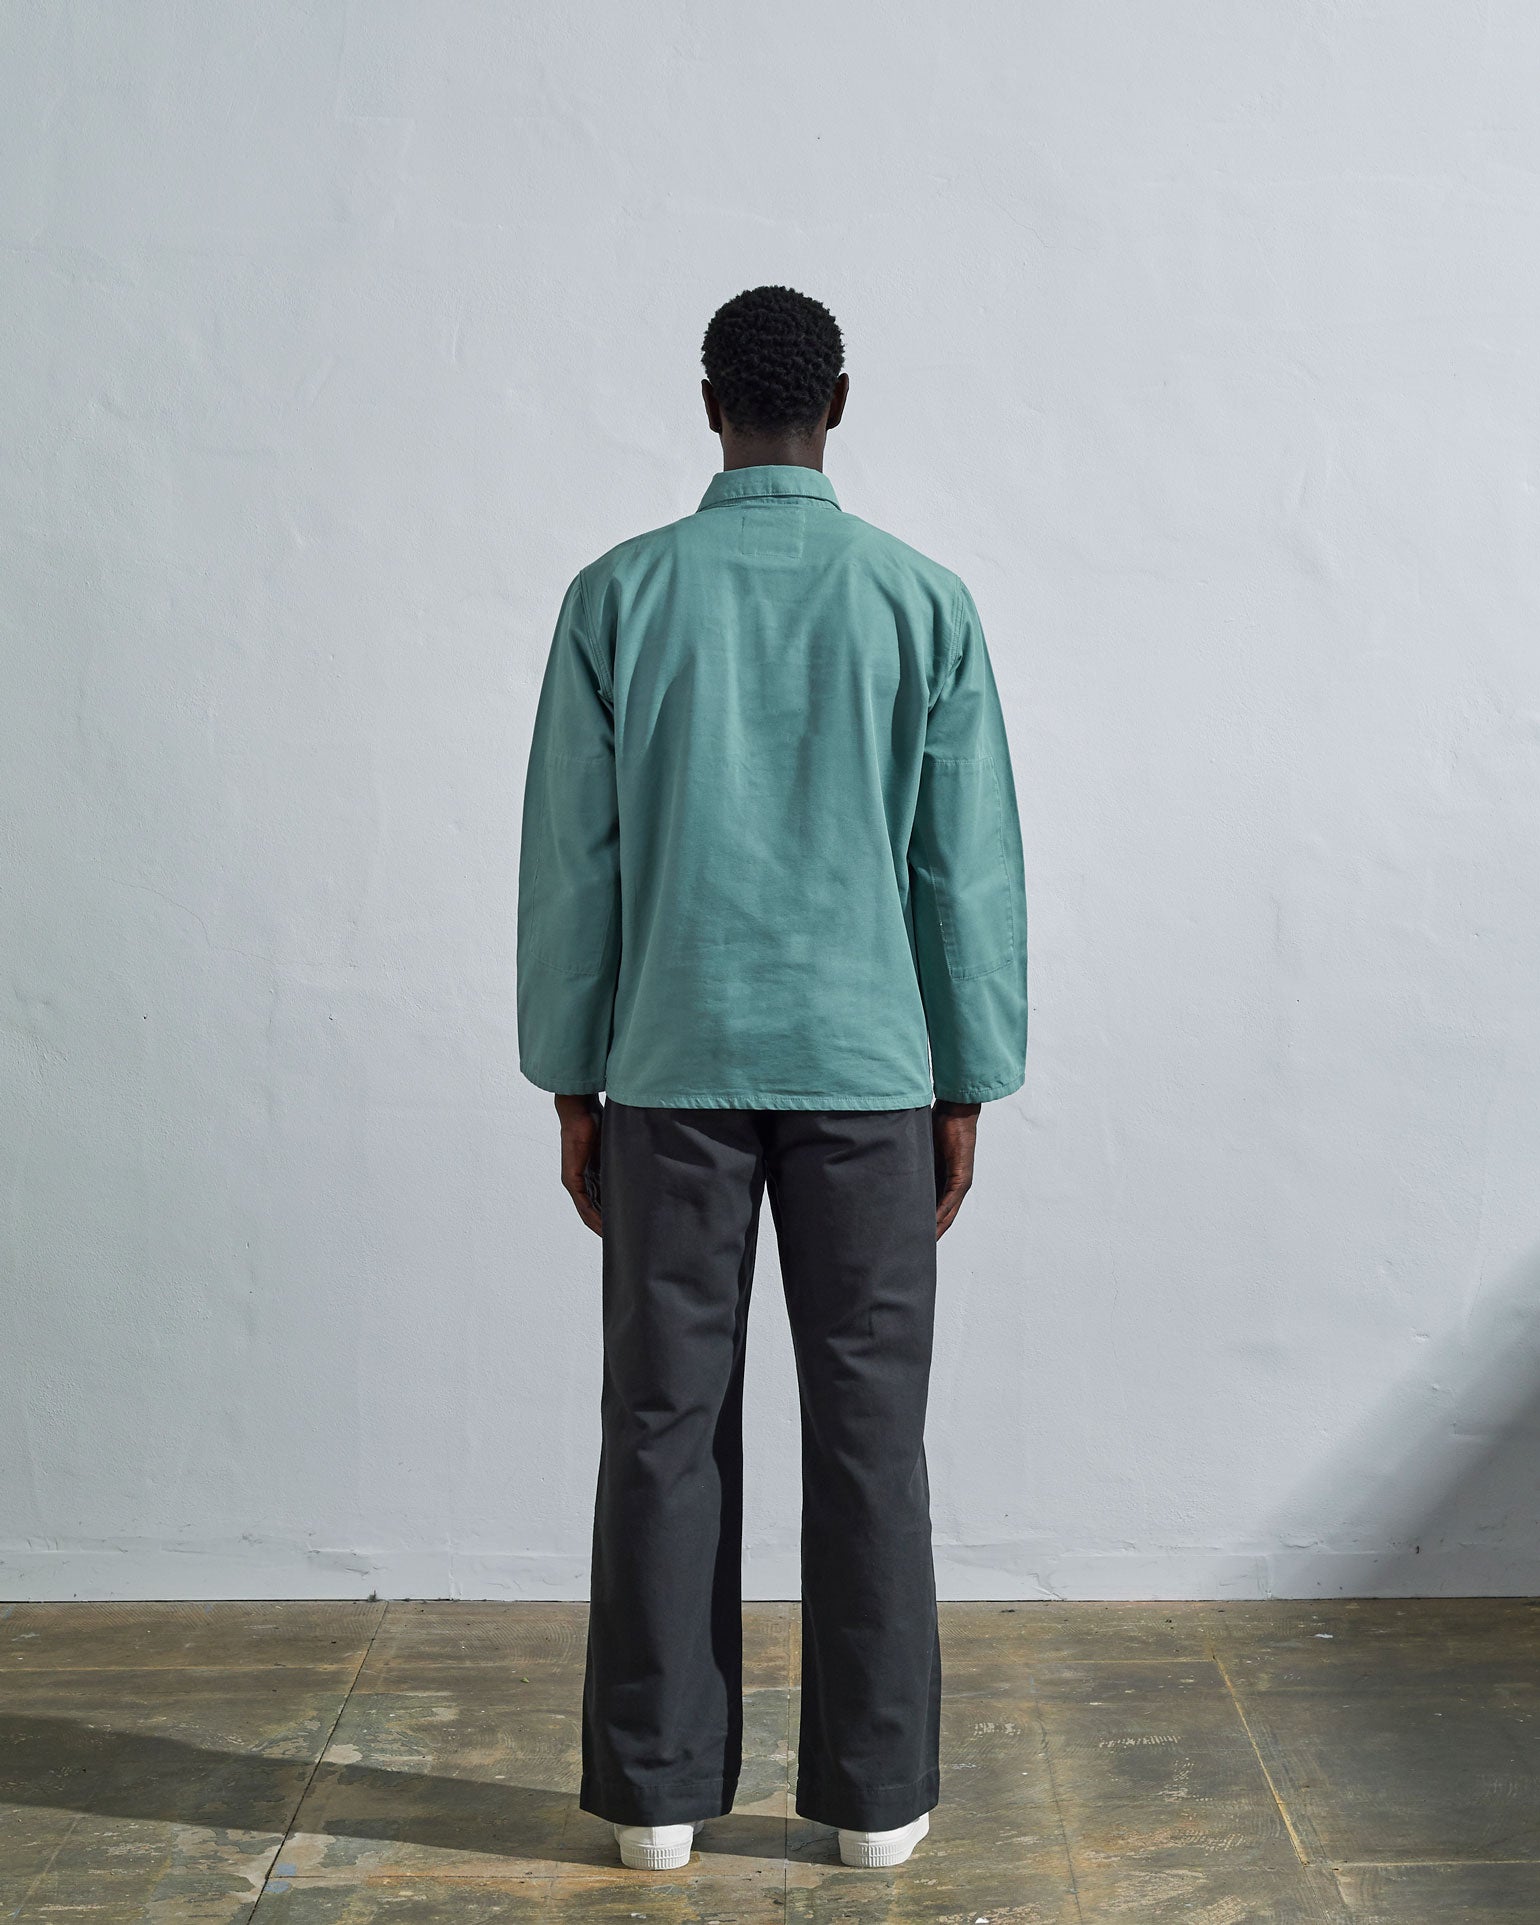 Full-length reverse wearing #3001, 'blue-green 'eucalyptus' organic cotton over shirt with view of reinforced elbows and boxy silhouette.